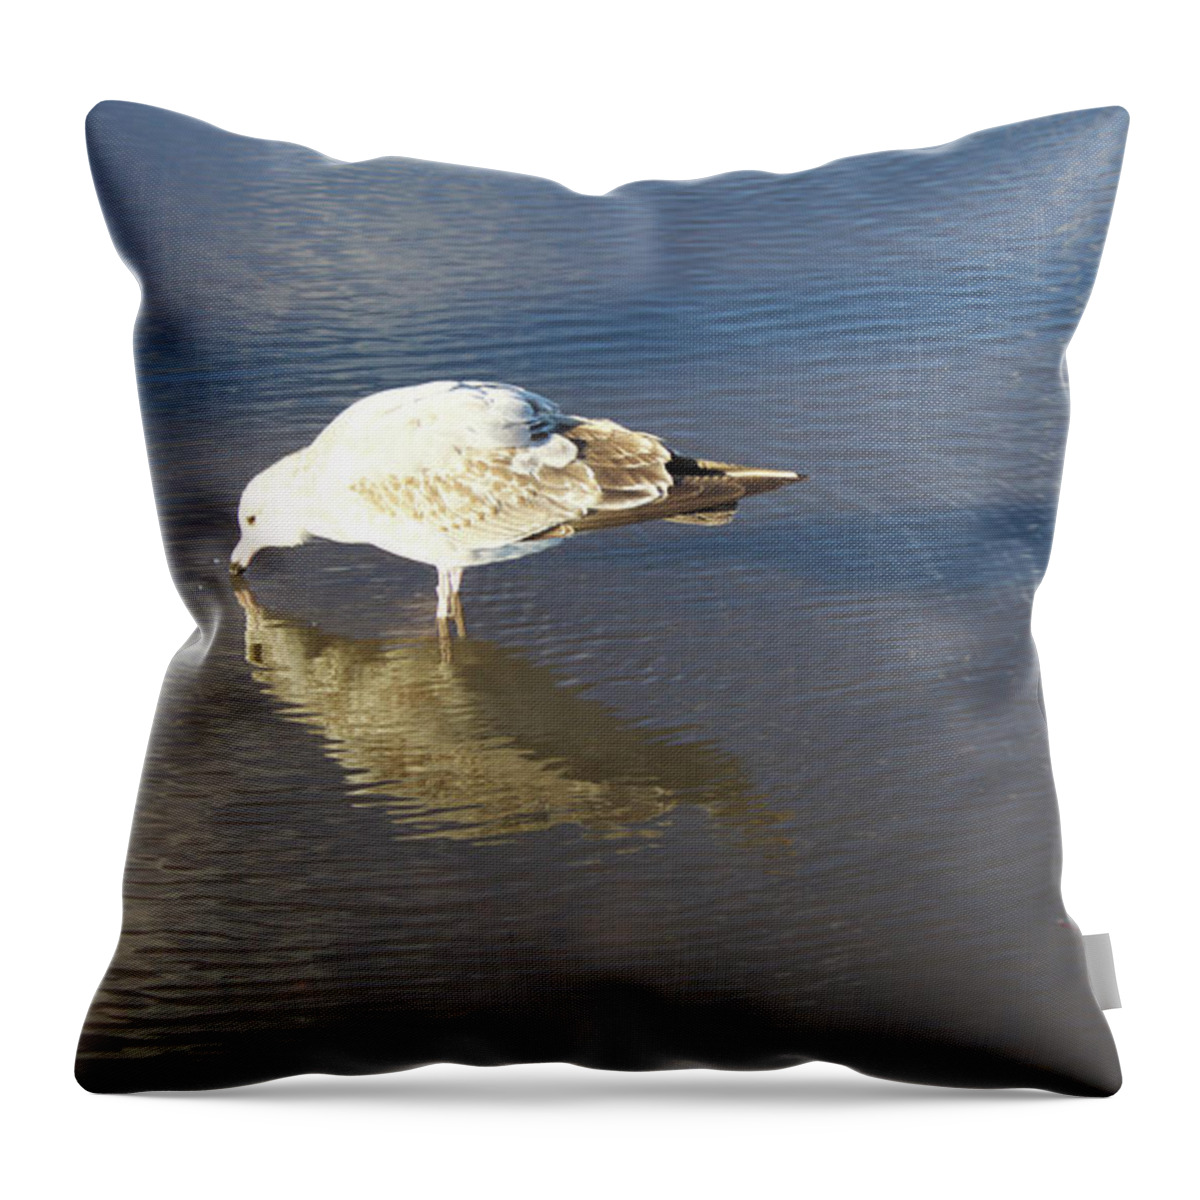 Narcissus Throw Pillow featuring the photograph The Flying Narcissus by Donato Iannuzzi